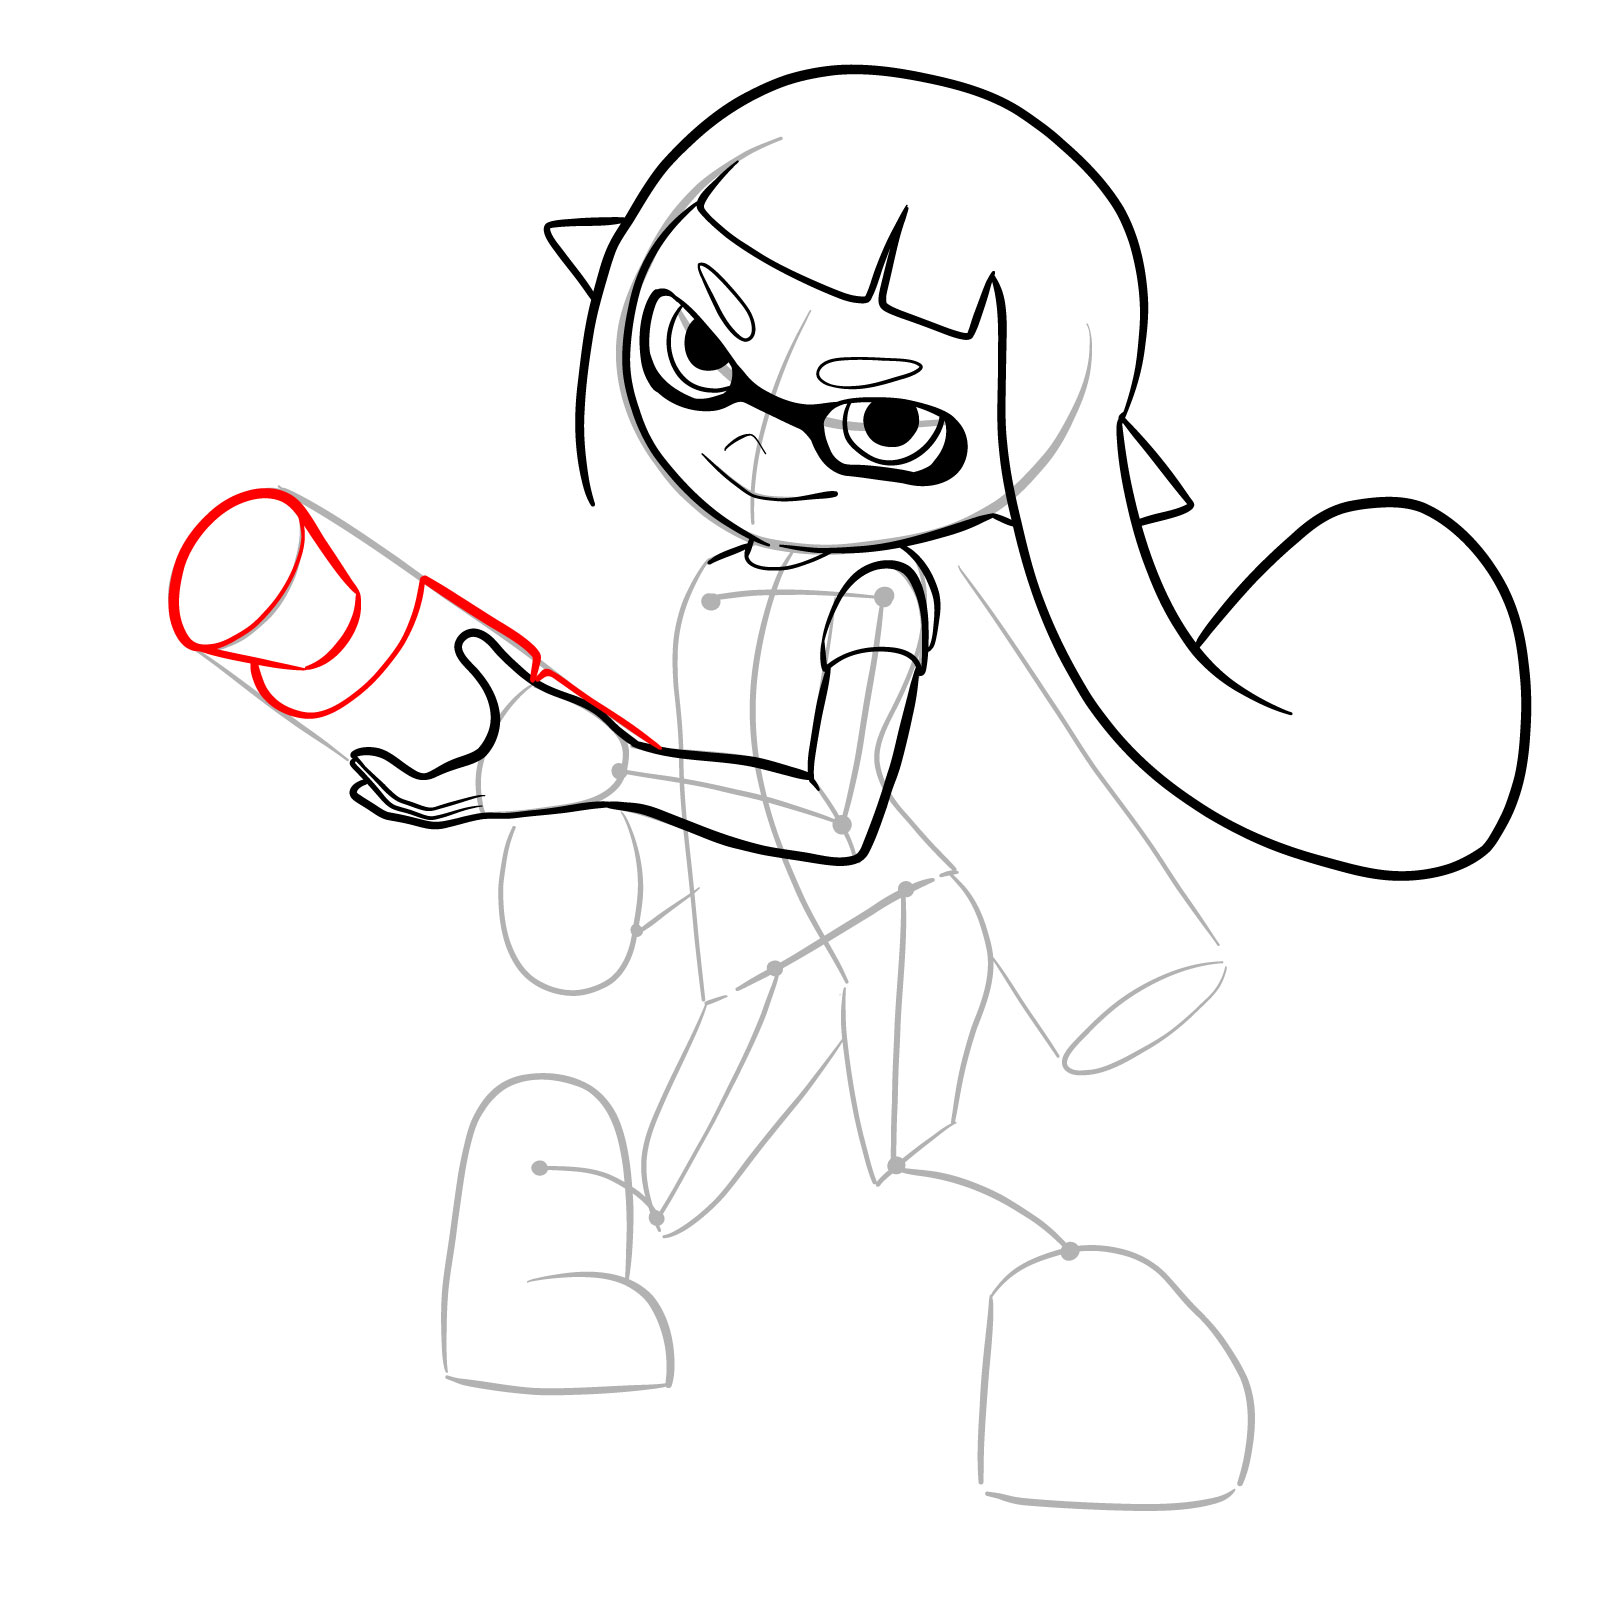 How to draw an Inkling Girl - step 16